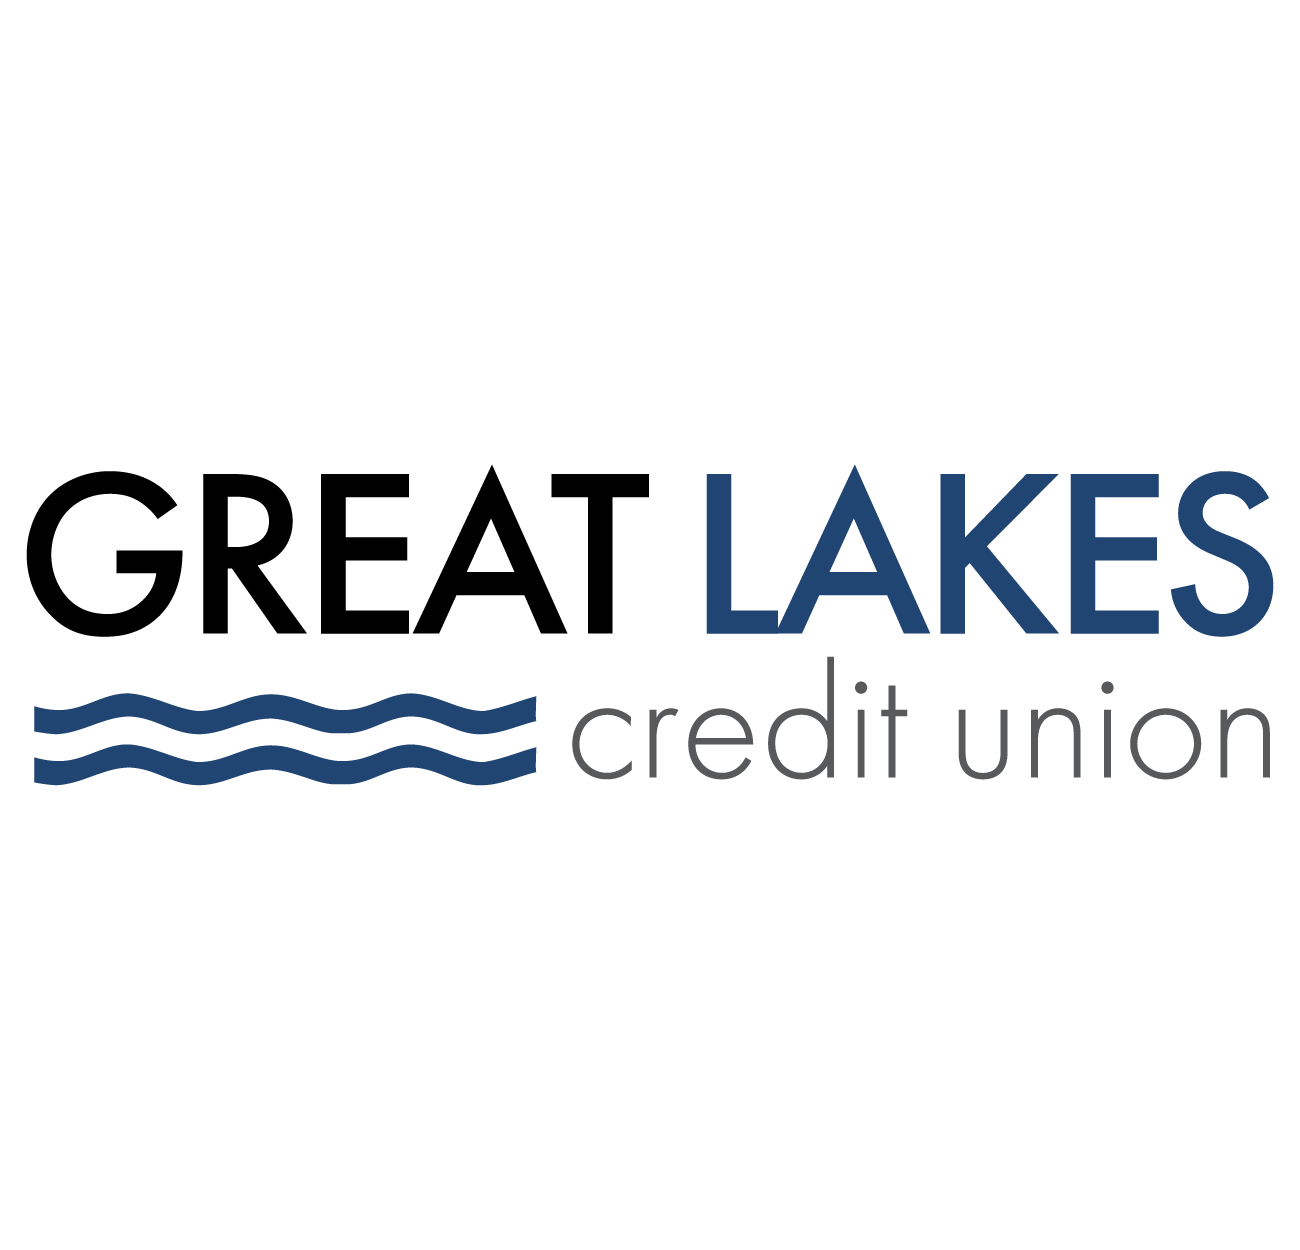 Great Lakes Credit Union | GLCU | Banking in Northern Illinois ...